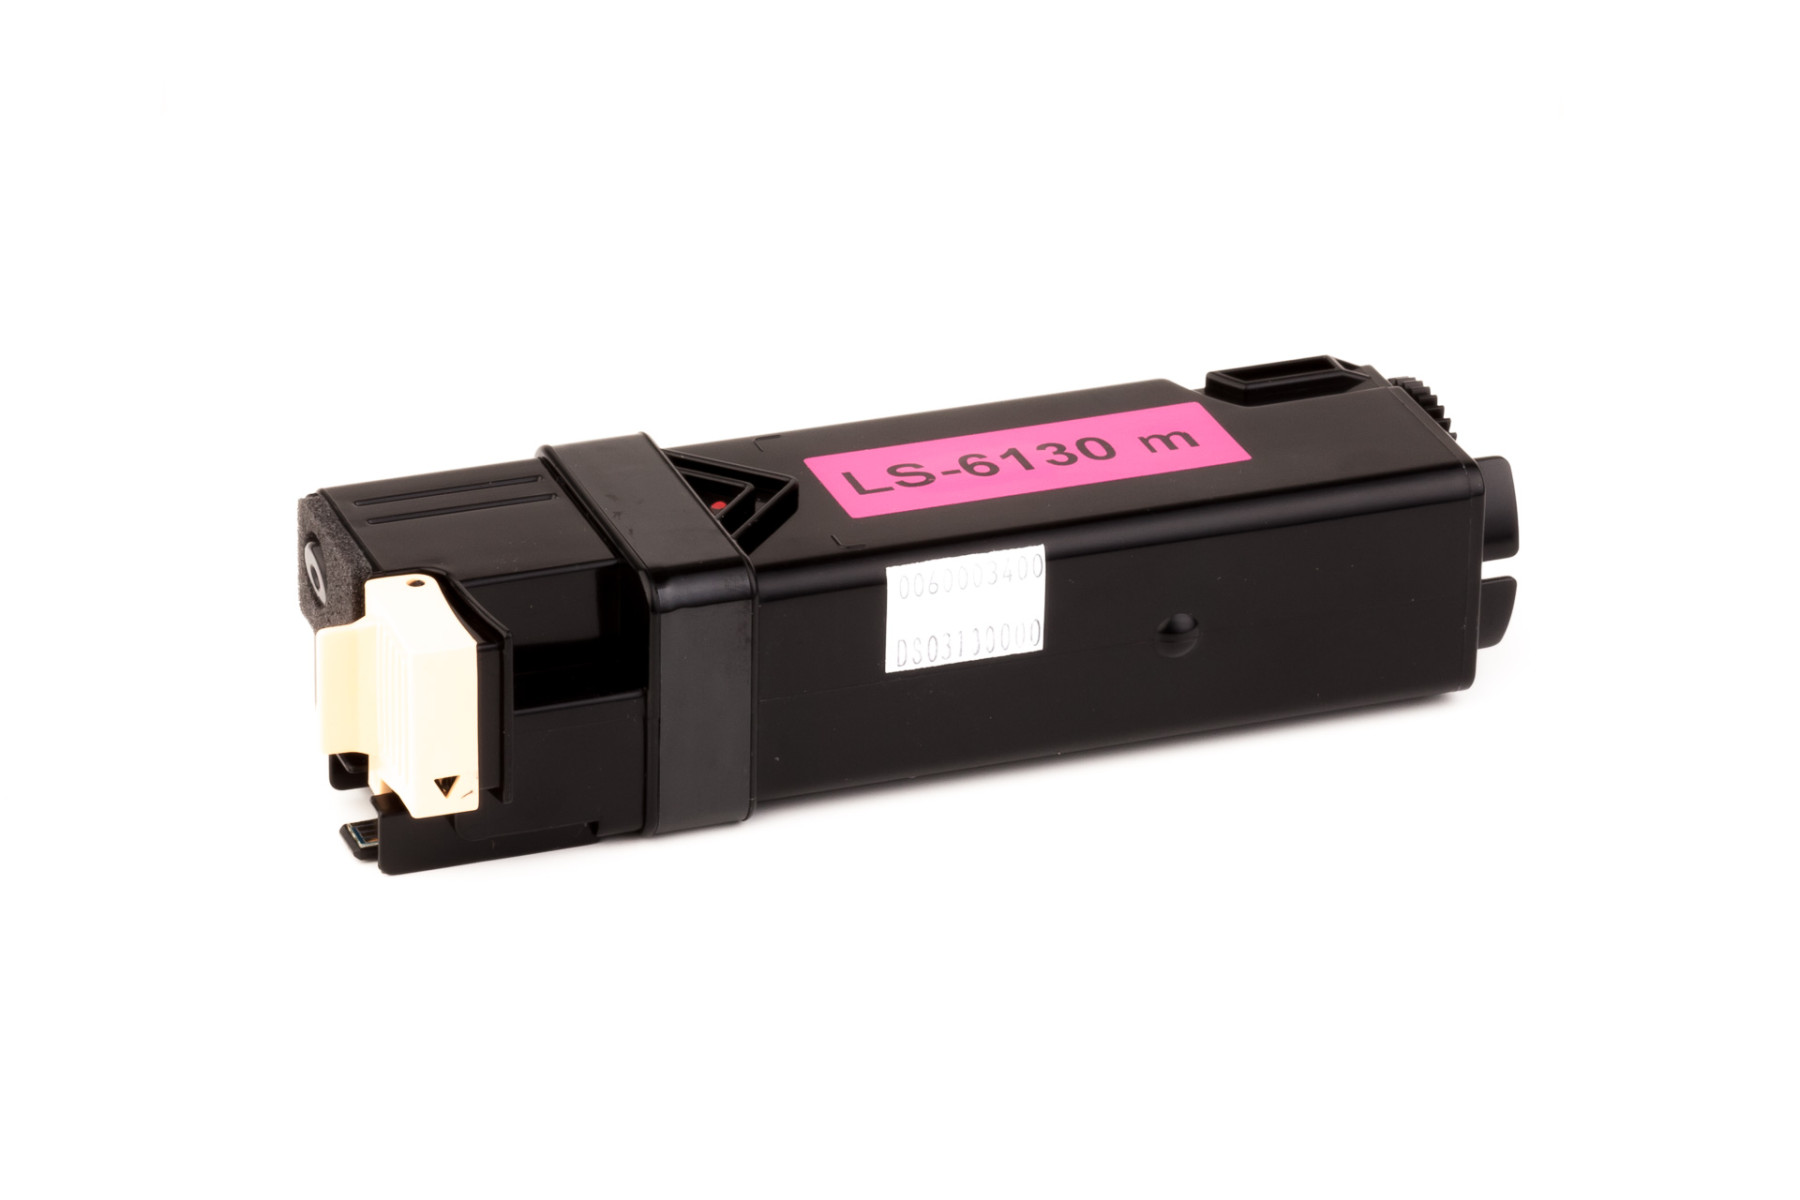 Set consisting of Toner cartridge (alternative) compatible with Xerox Phaser 6130 black, cyan, magenta, yellow - Save 6%